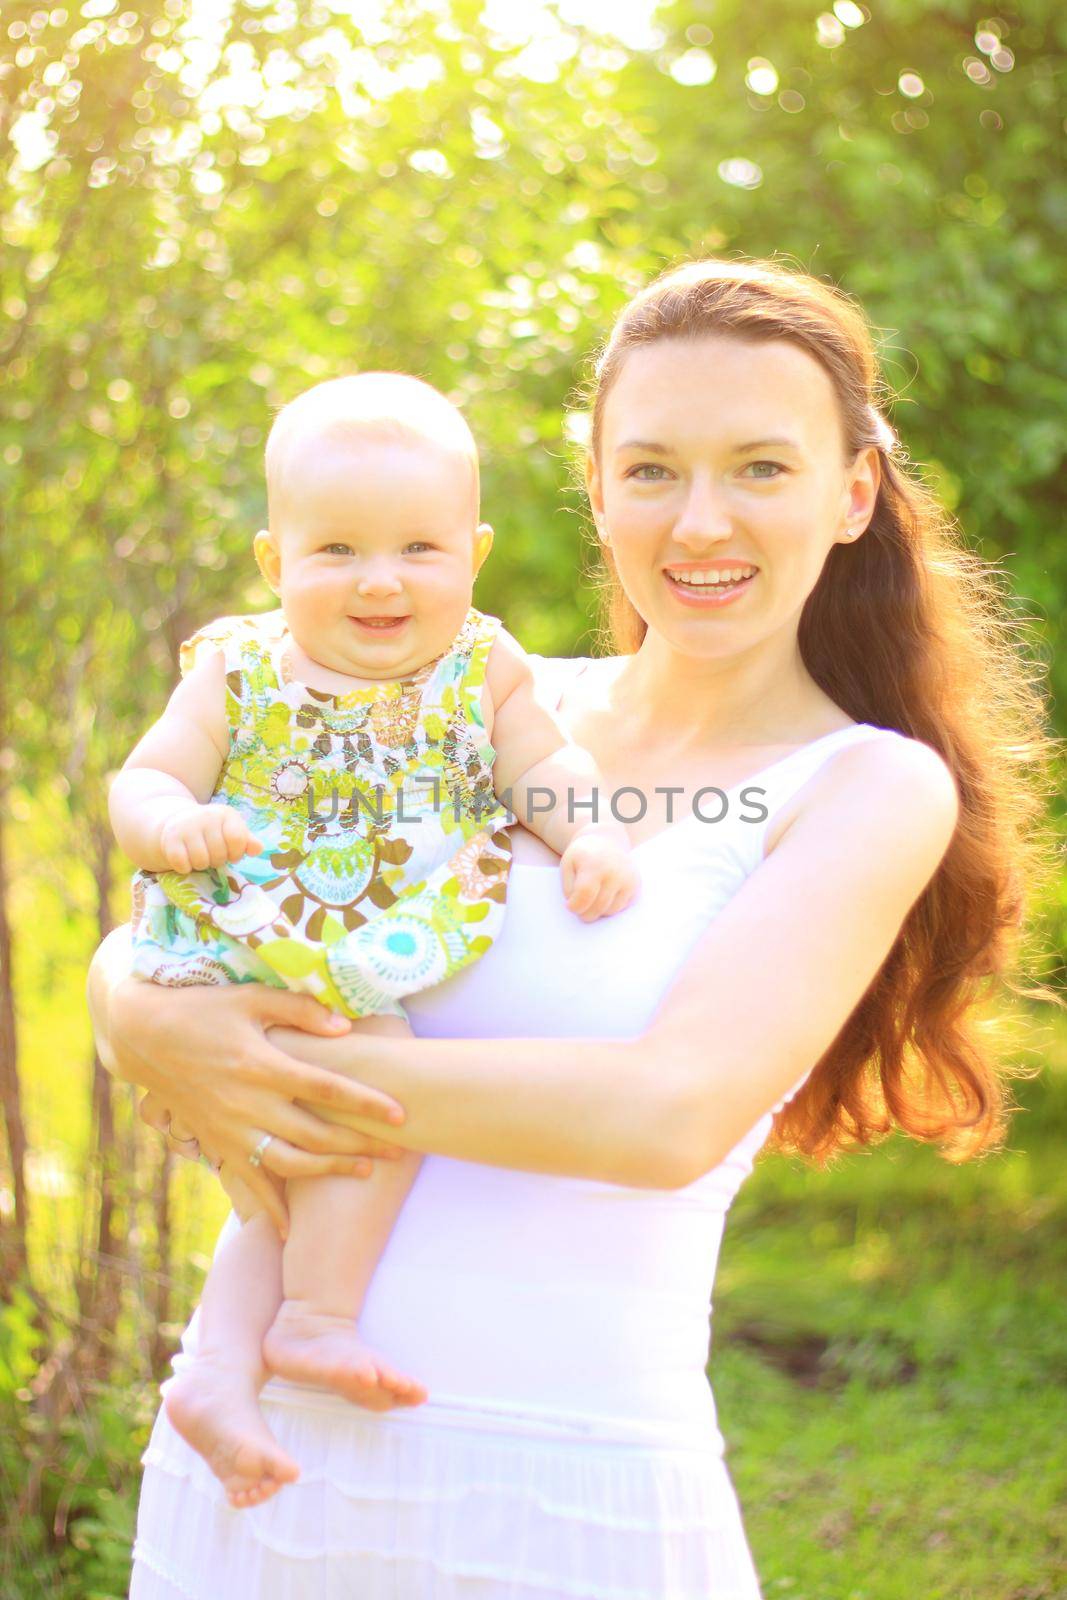 Beautiful Mother And Baby outdoors. Nature. Beauty Mum her Child playing in Park together by SmartPhotoLab